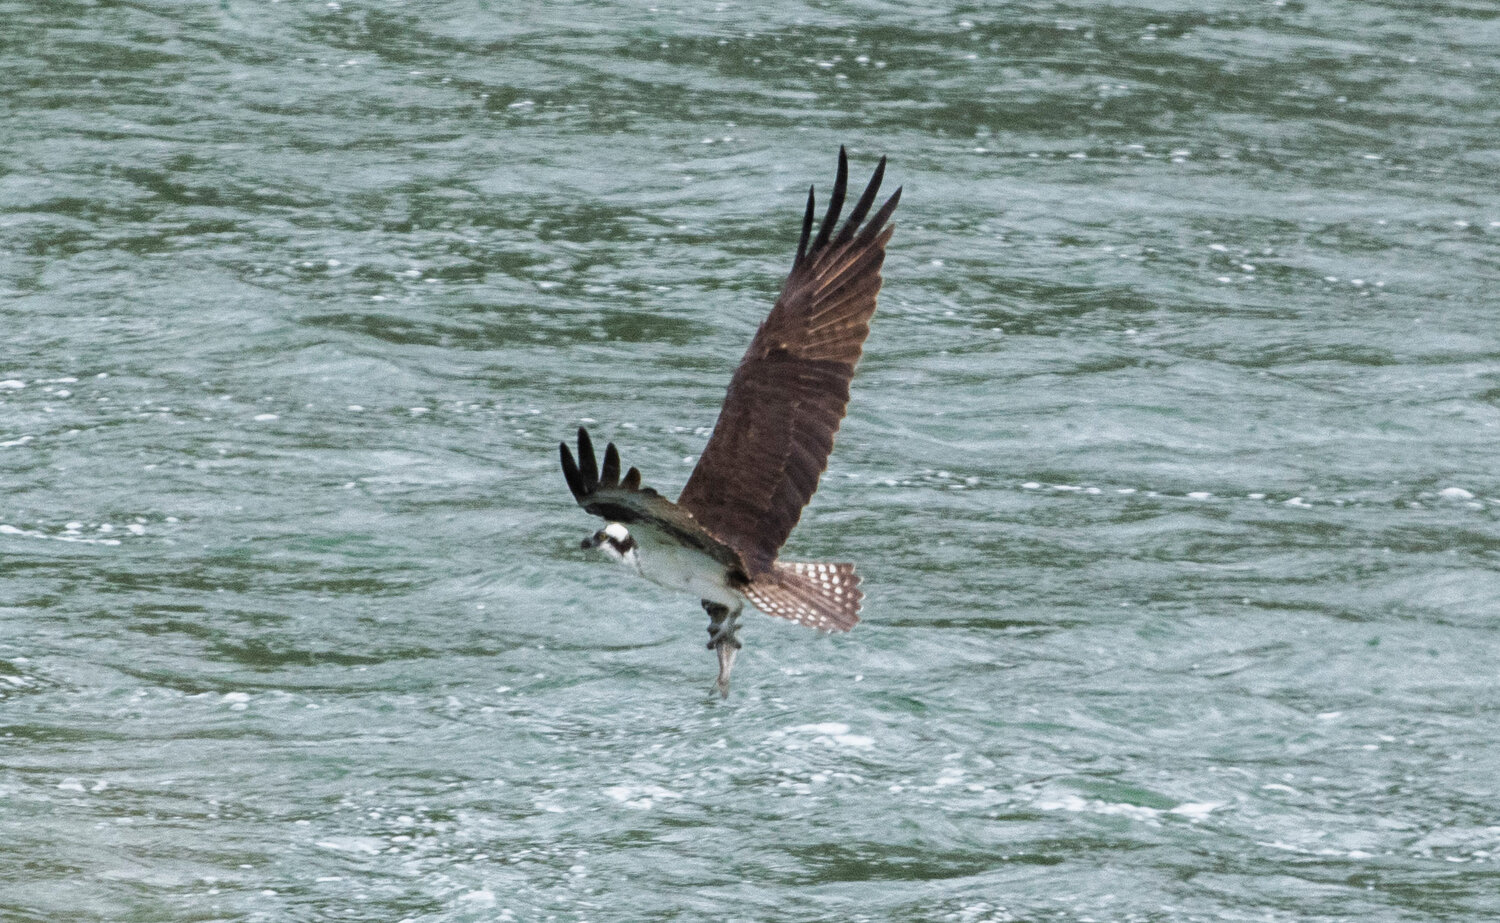 An osprey hunts for fish outside the Cowlitz Salmon Hatchery in Salkum on Monday.